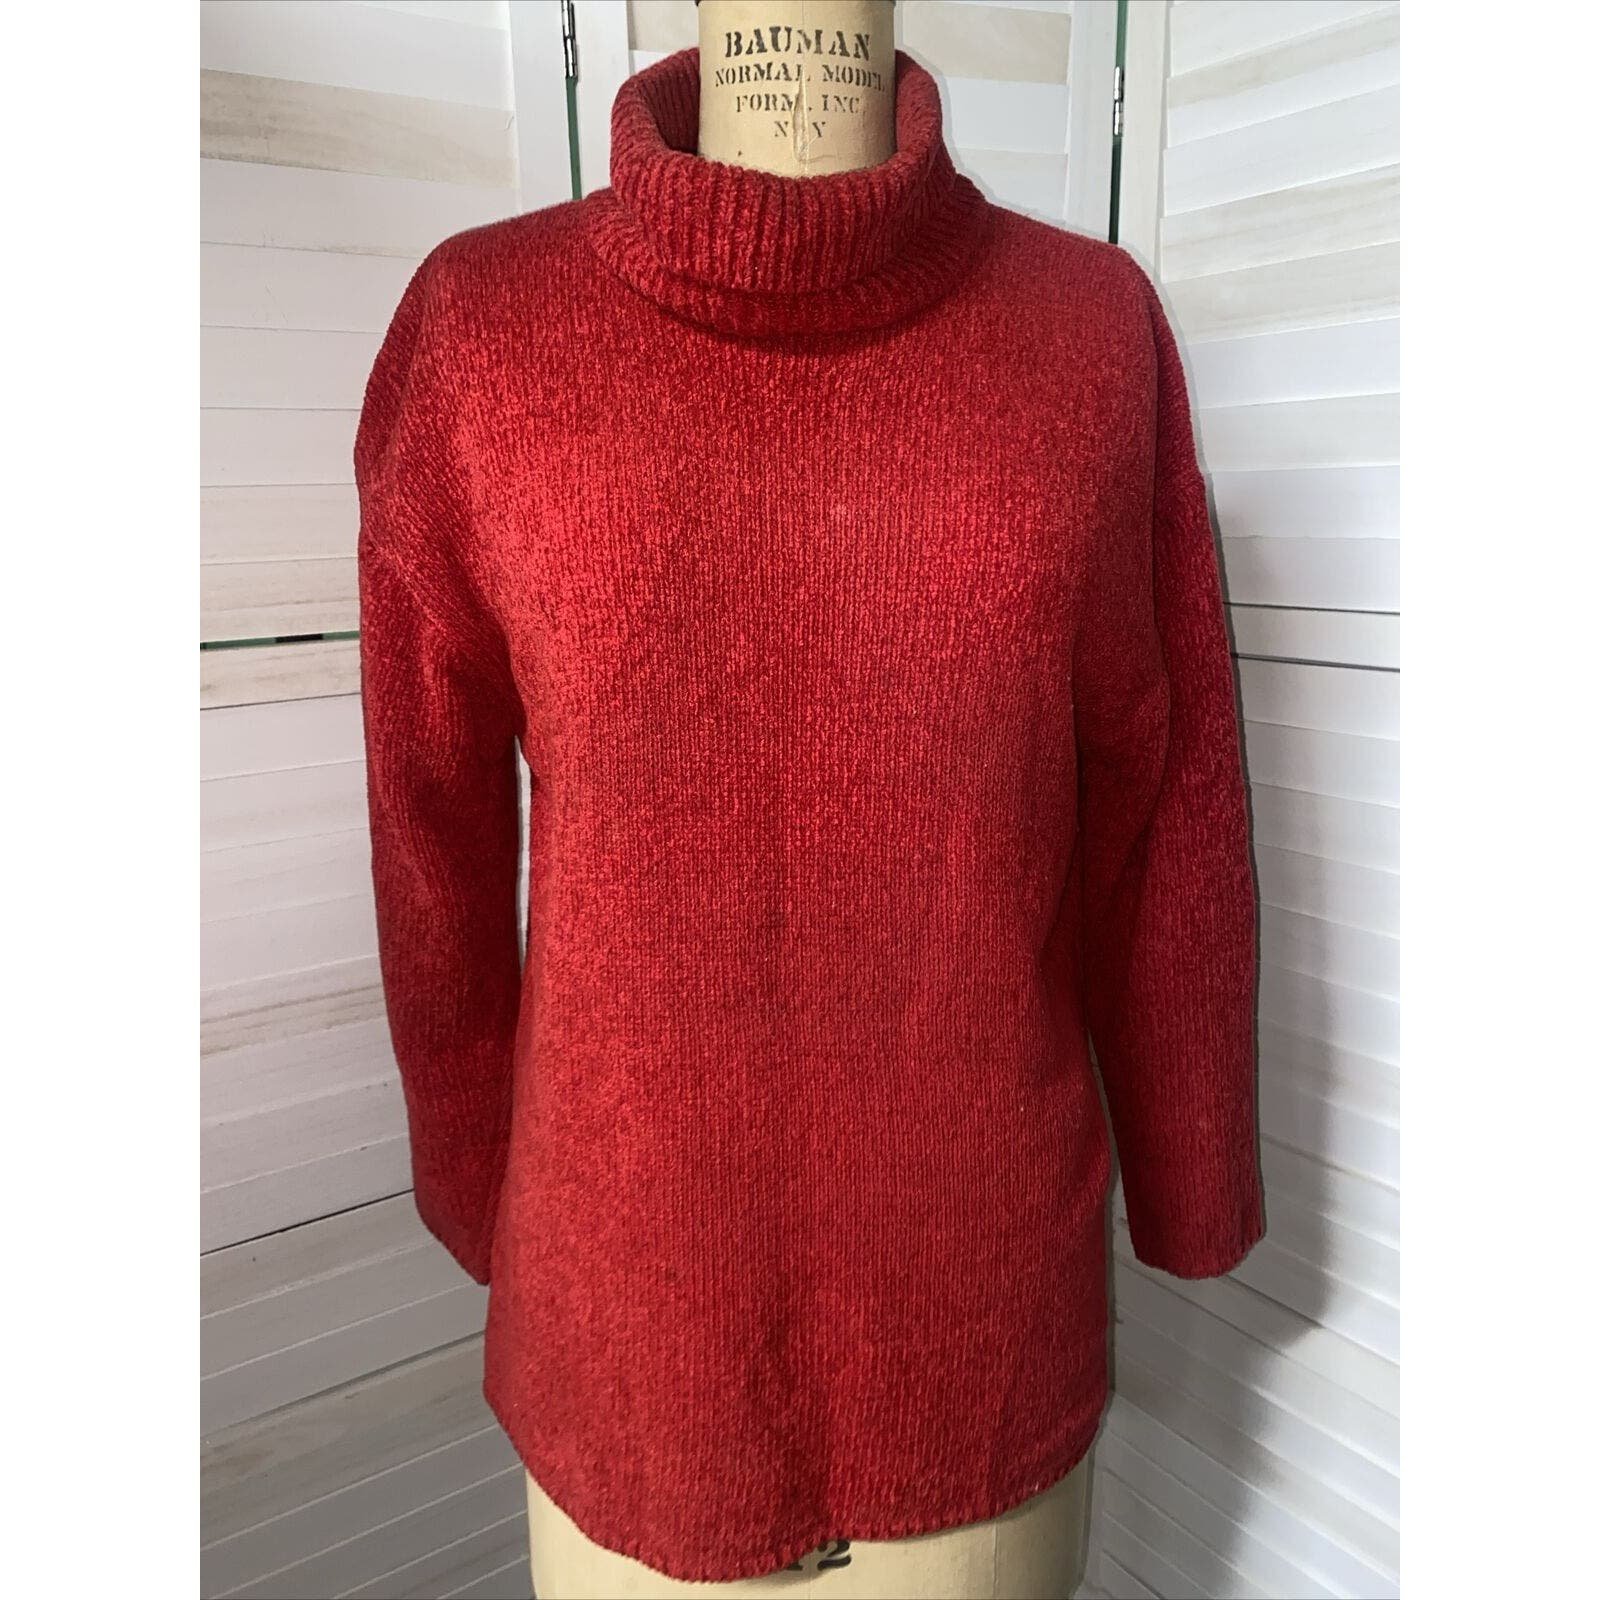 Stylish Vintage 90s CHAUS Women’s Red Chenille Knit Acrylic SWEATER Size Large KPAaK0HjZ Discount